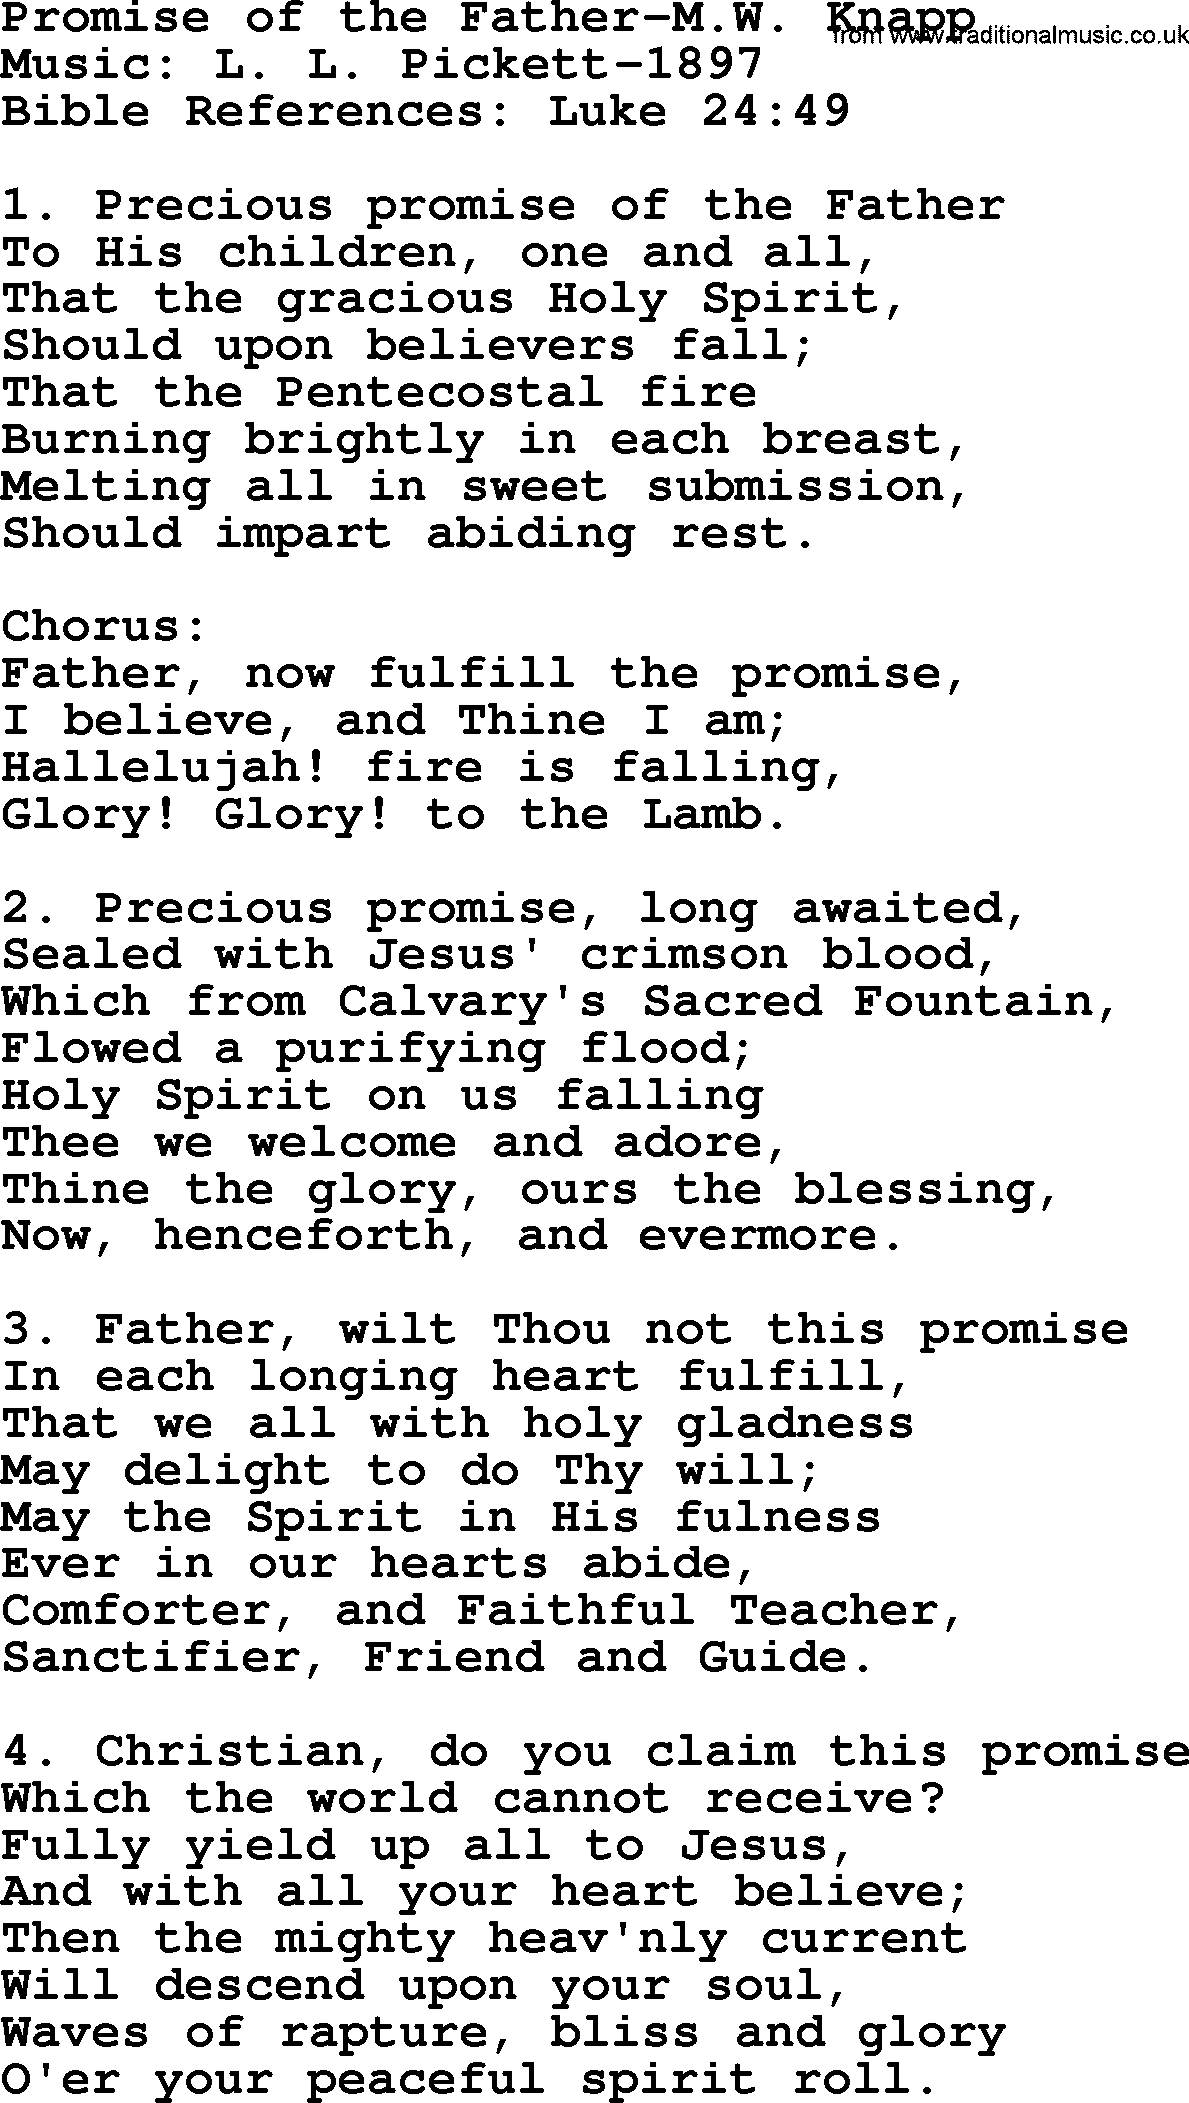 Philip Bliss Song: Promise Of The Father-M.W. Knapp, lyrics